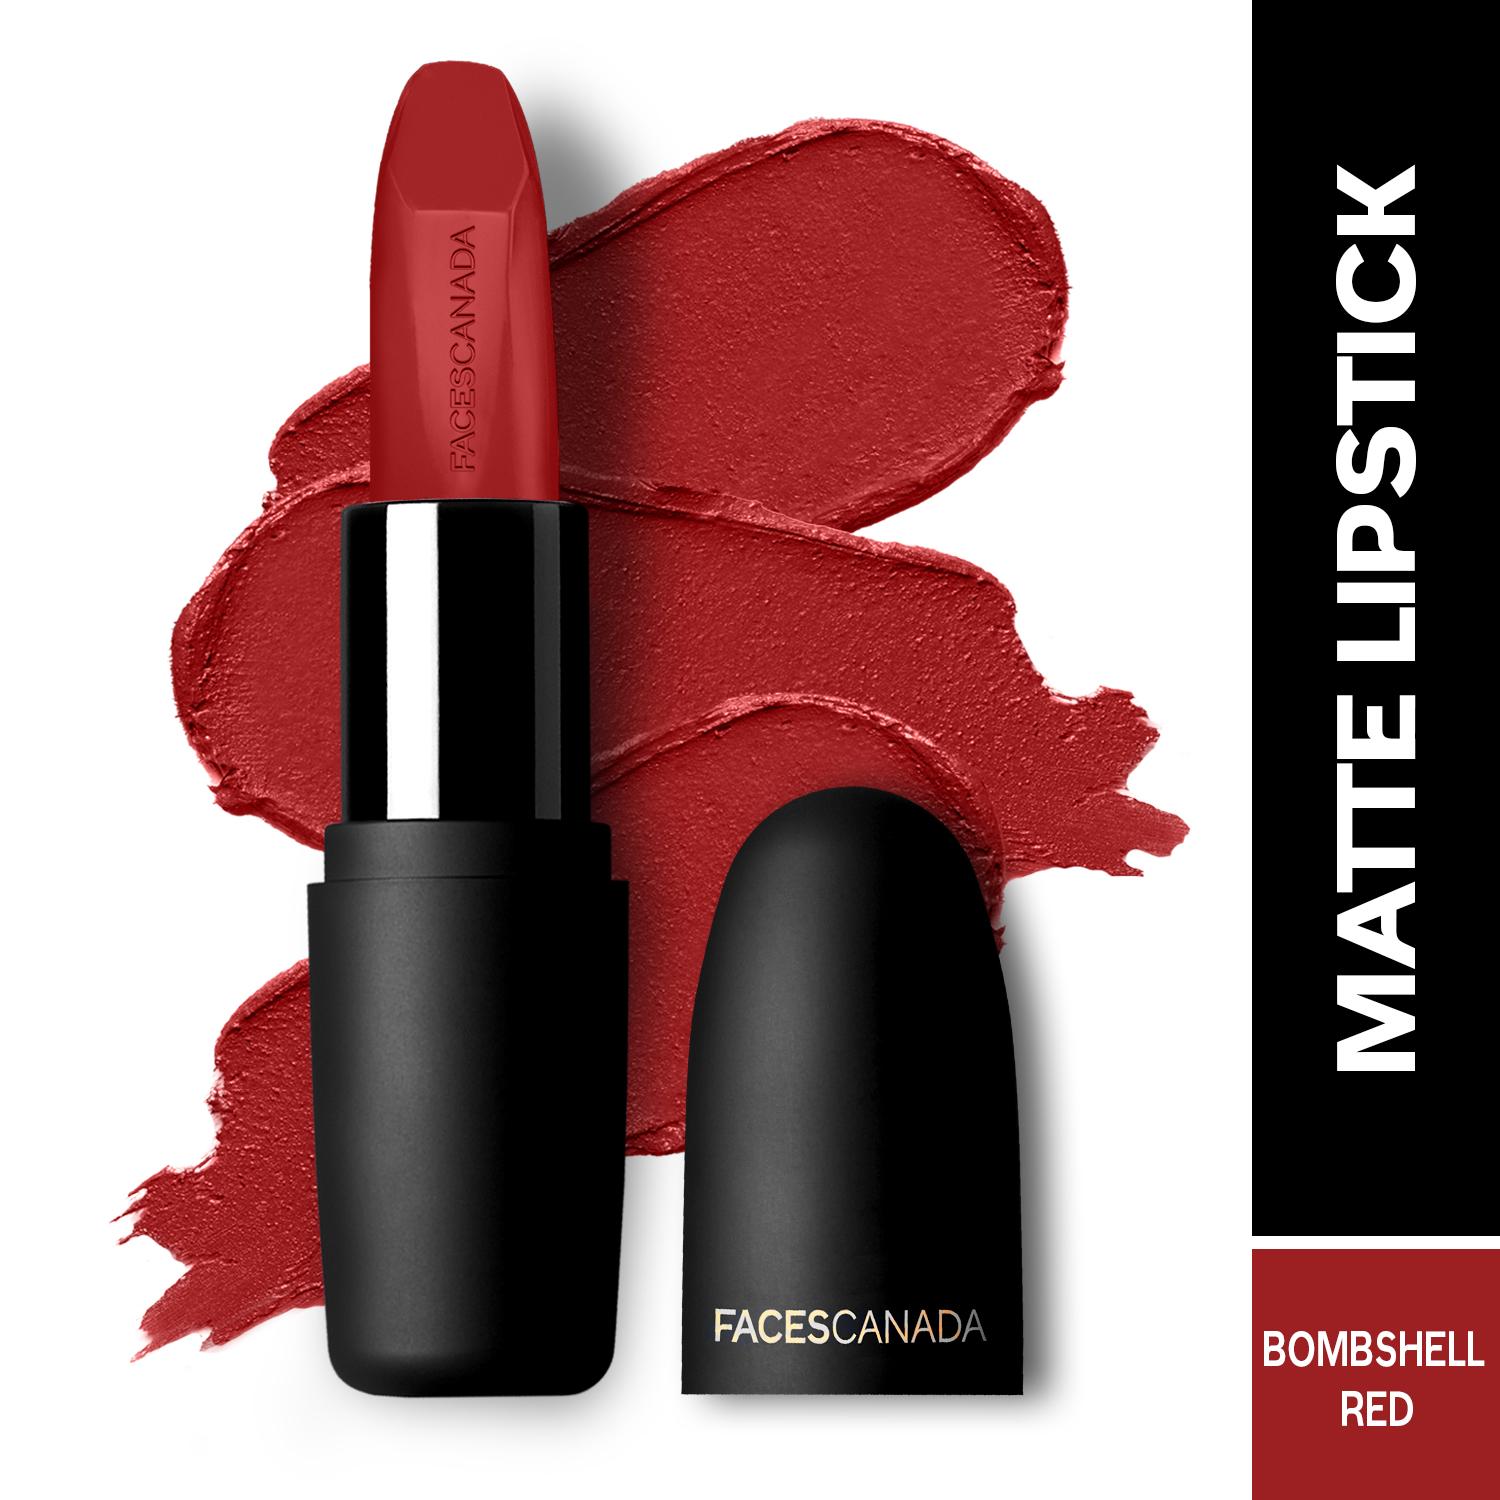 Faces Canada | Faces Canada Weightless Matte Lipstick, Pigmented and Hydrated Lips - Bombshell Red 09 (4.5 g)